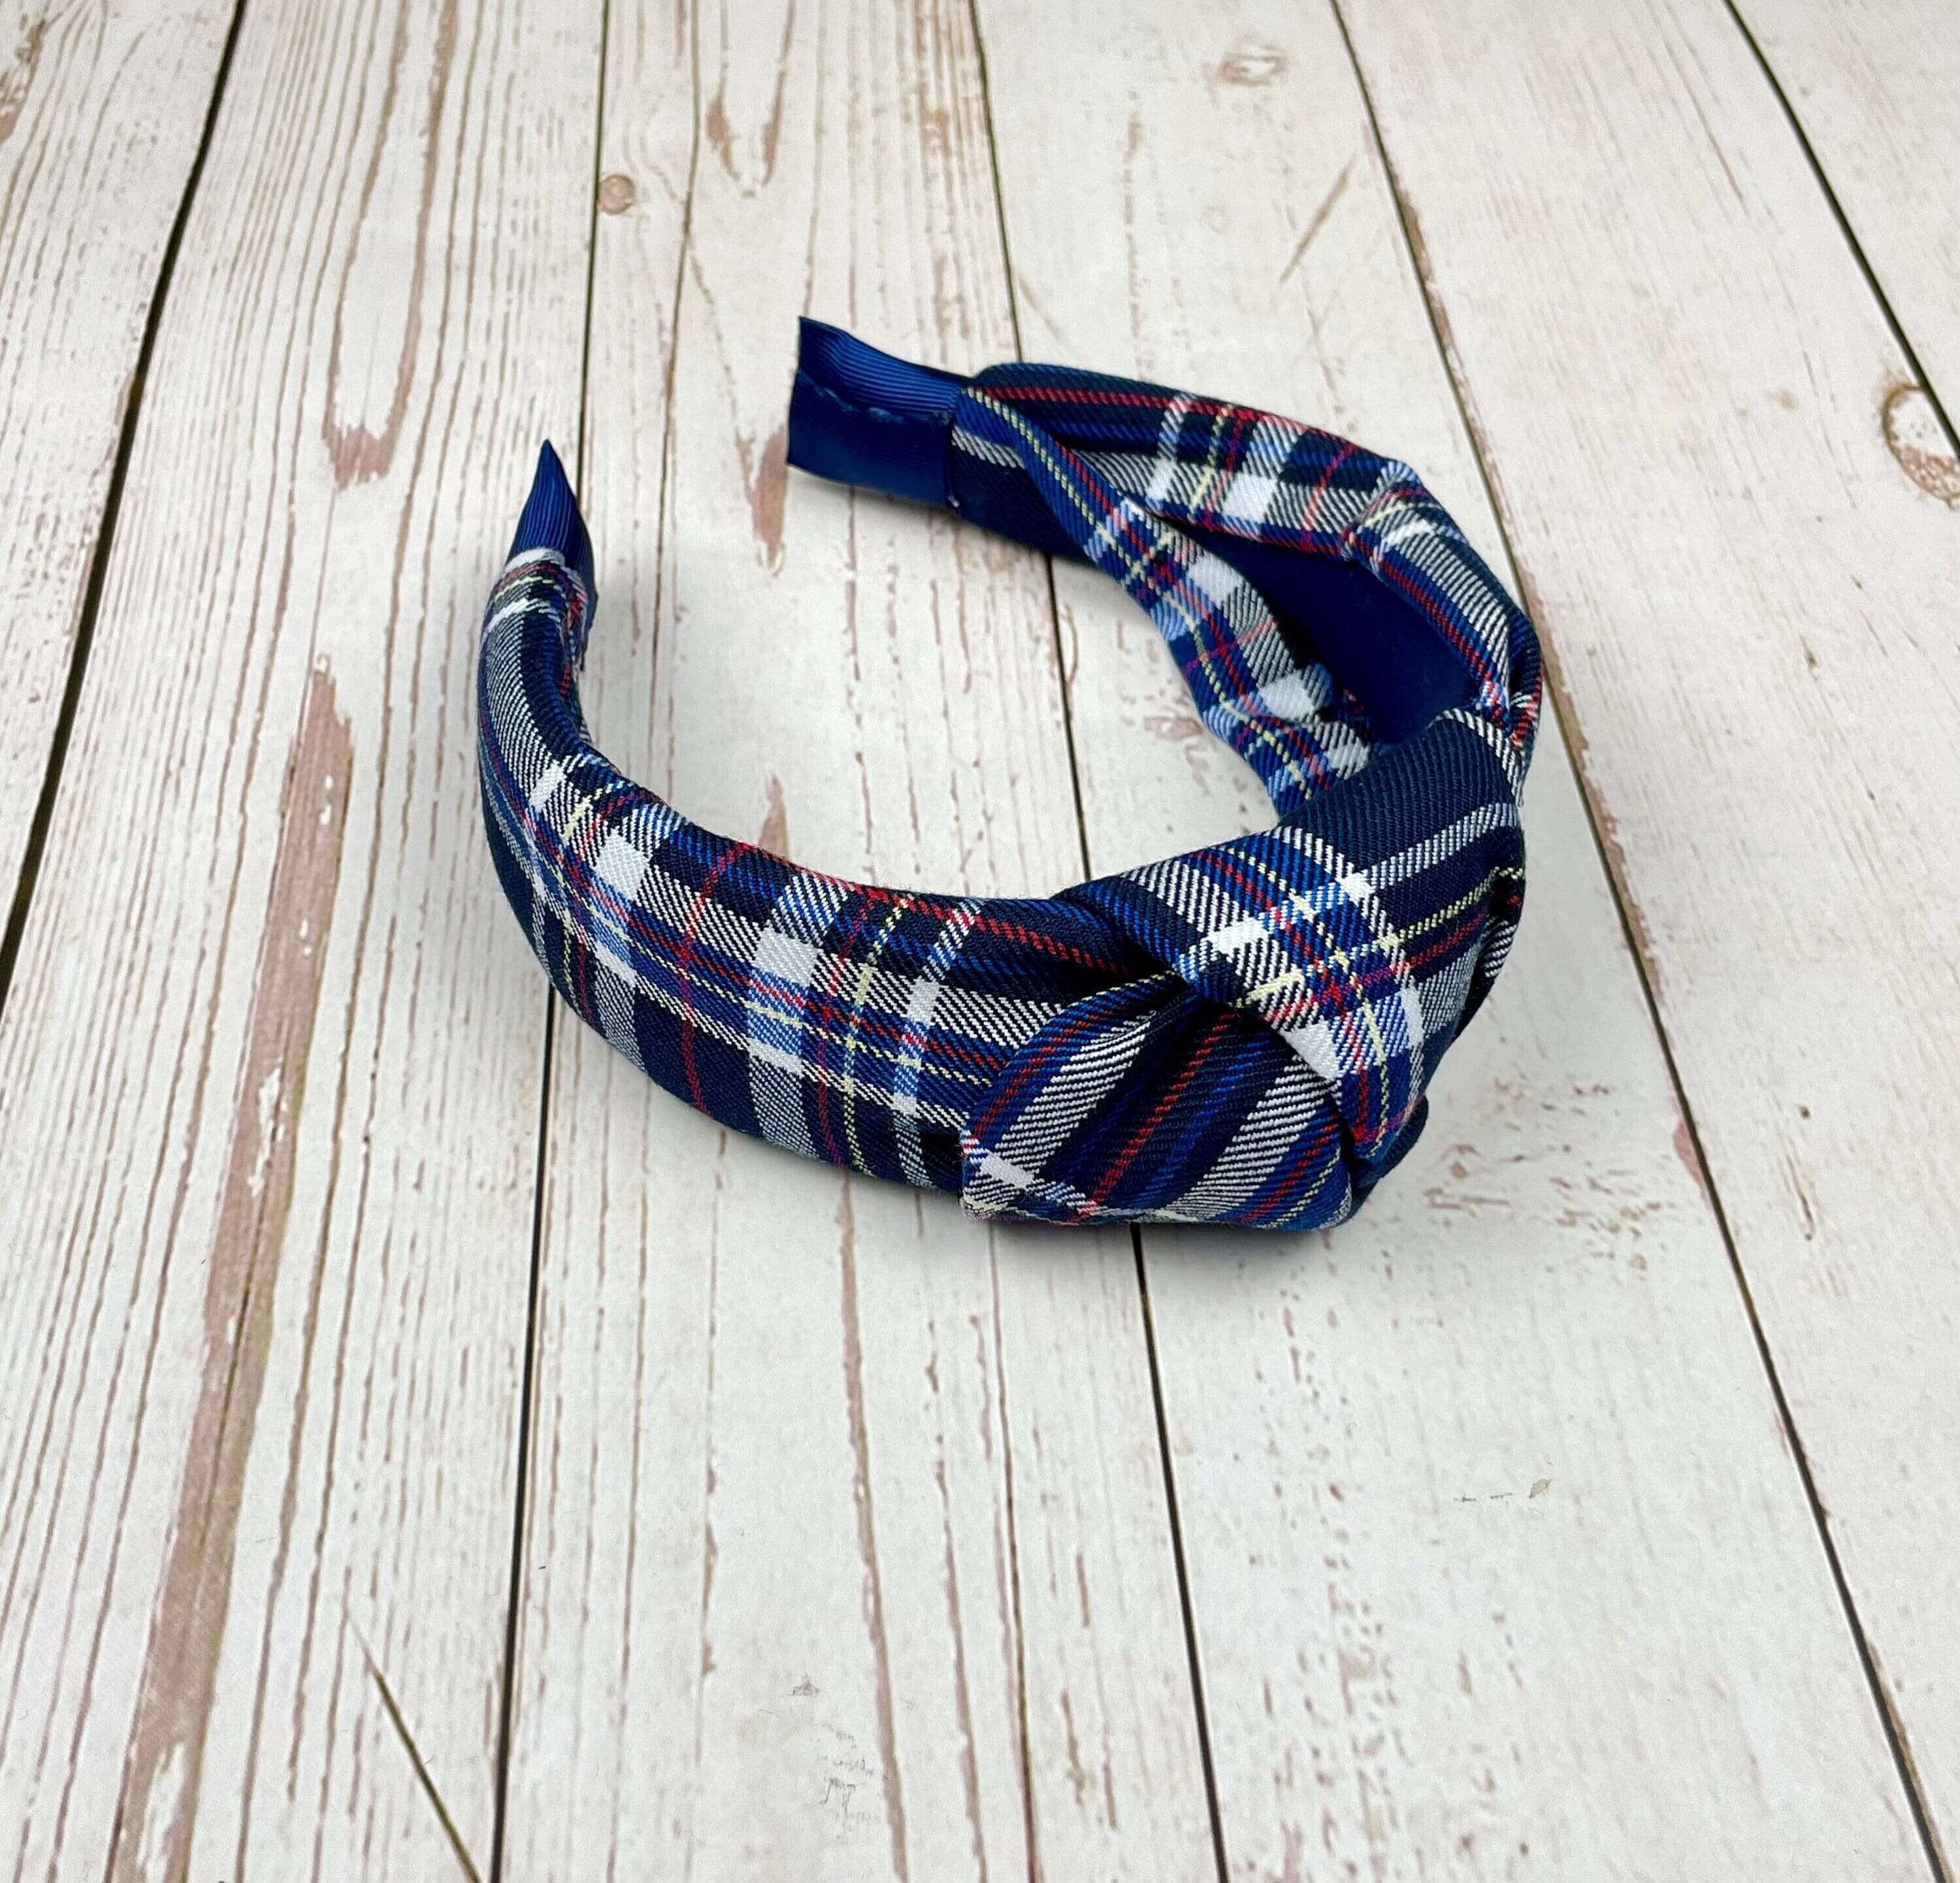 Upgrade your hair accessory collection with our Navy Blue and Pattern Headband. This wide hairband is perfect for teenage girls and is made from soft and stretchy material